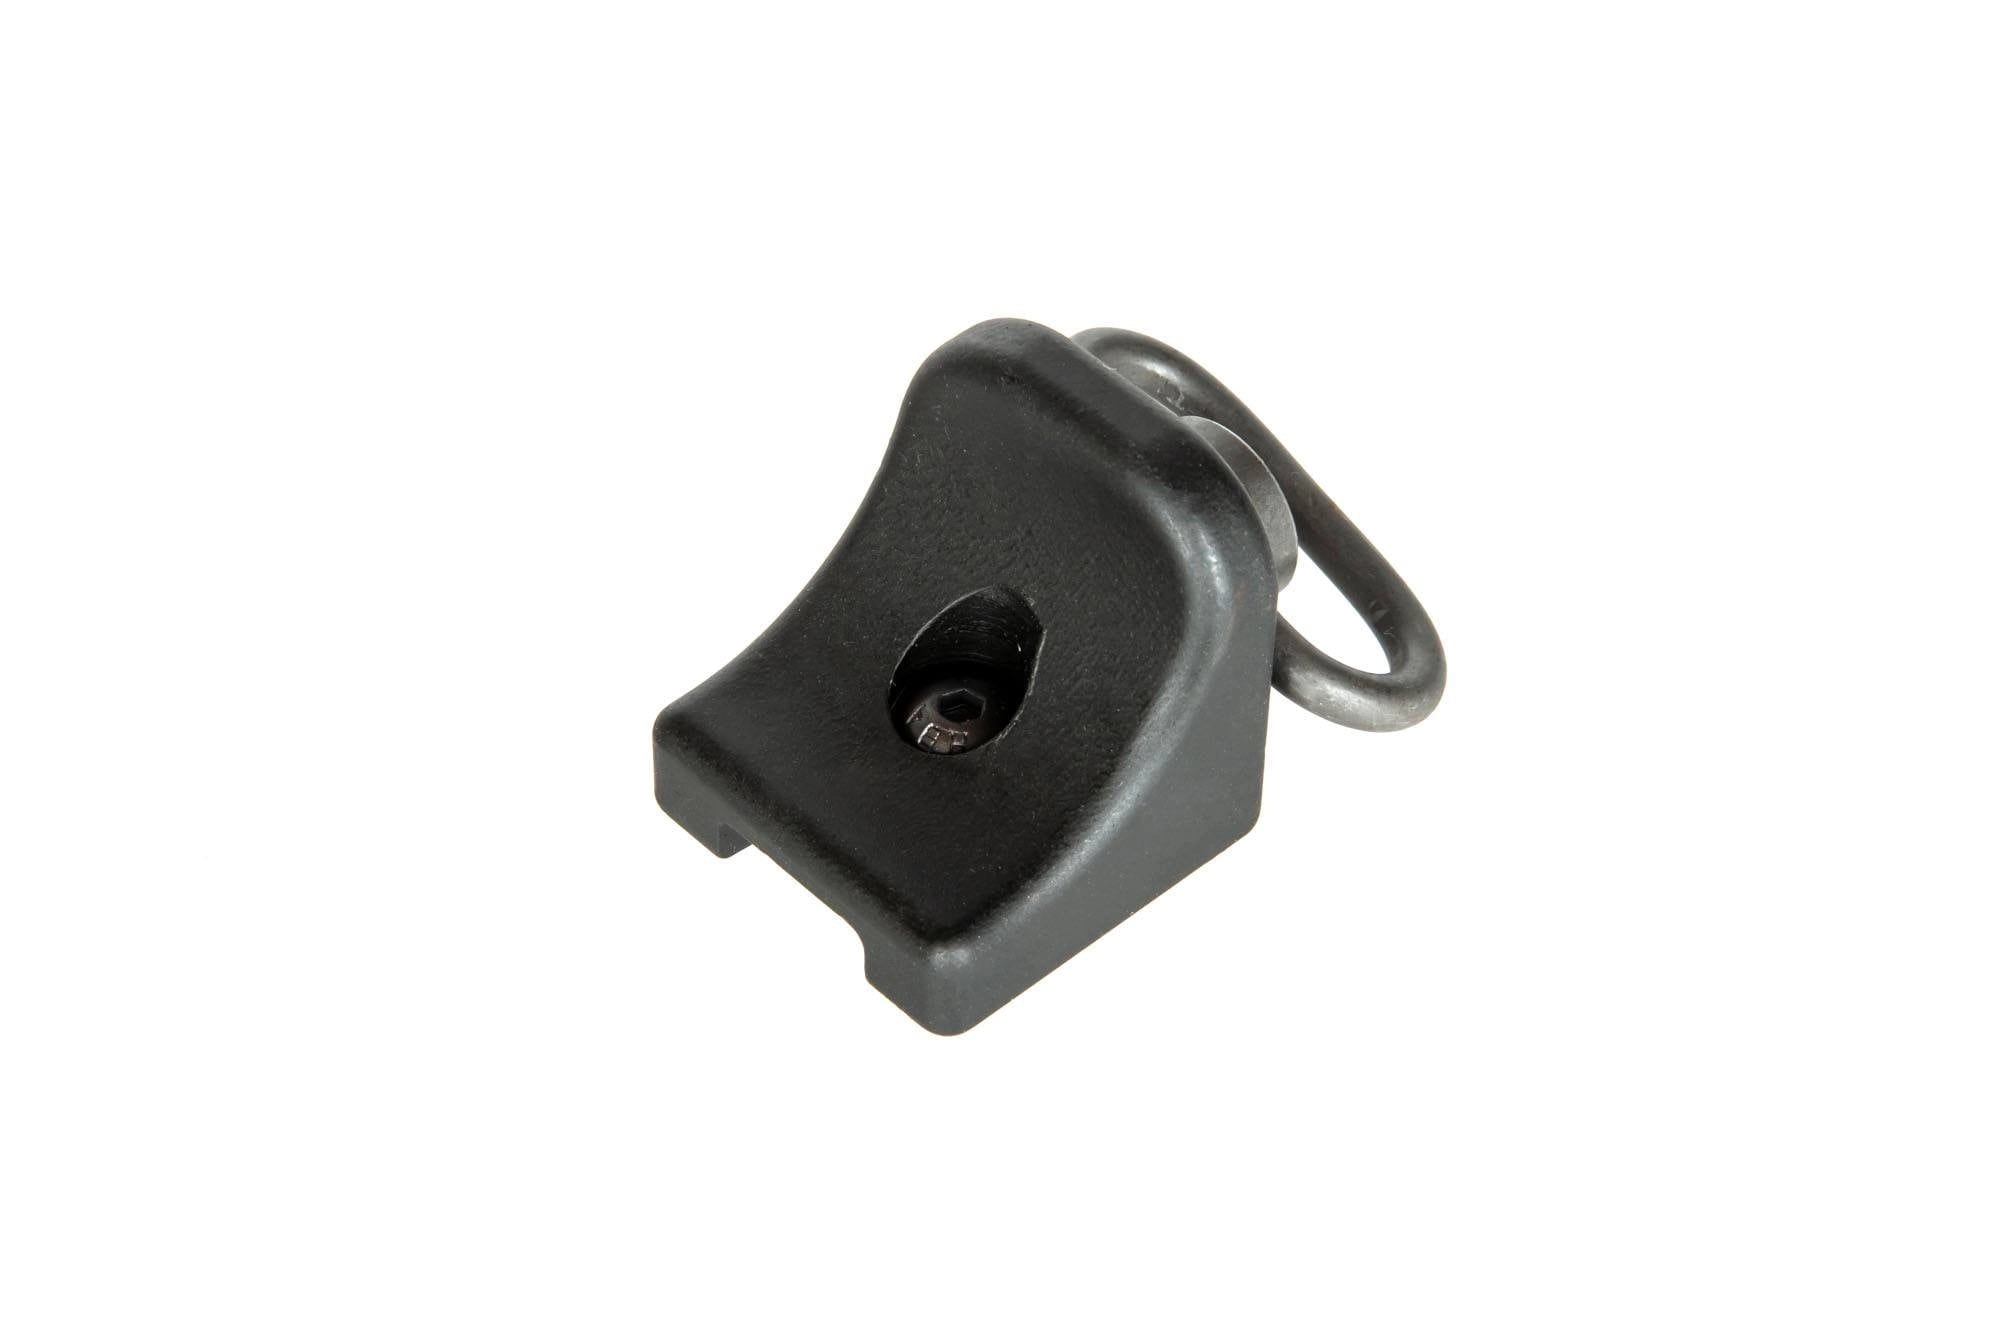 Hand-Stop with QD Sling Mount for LW URX Rails